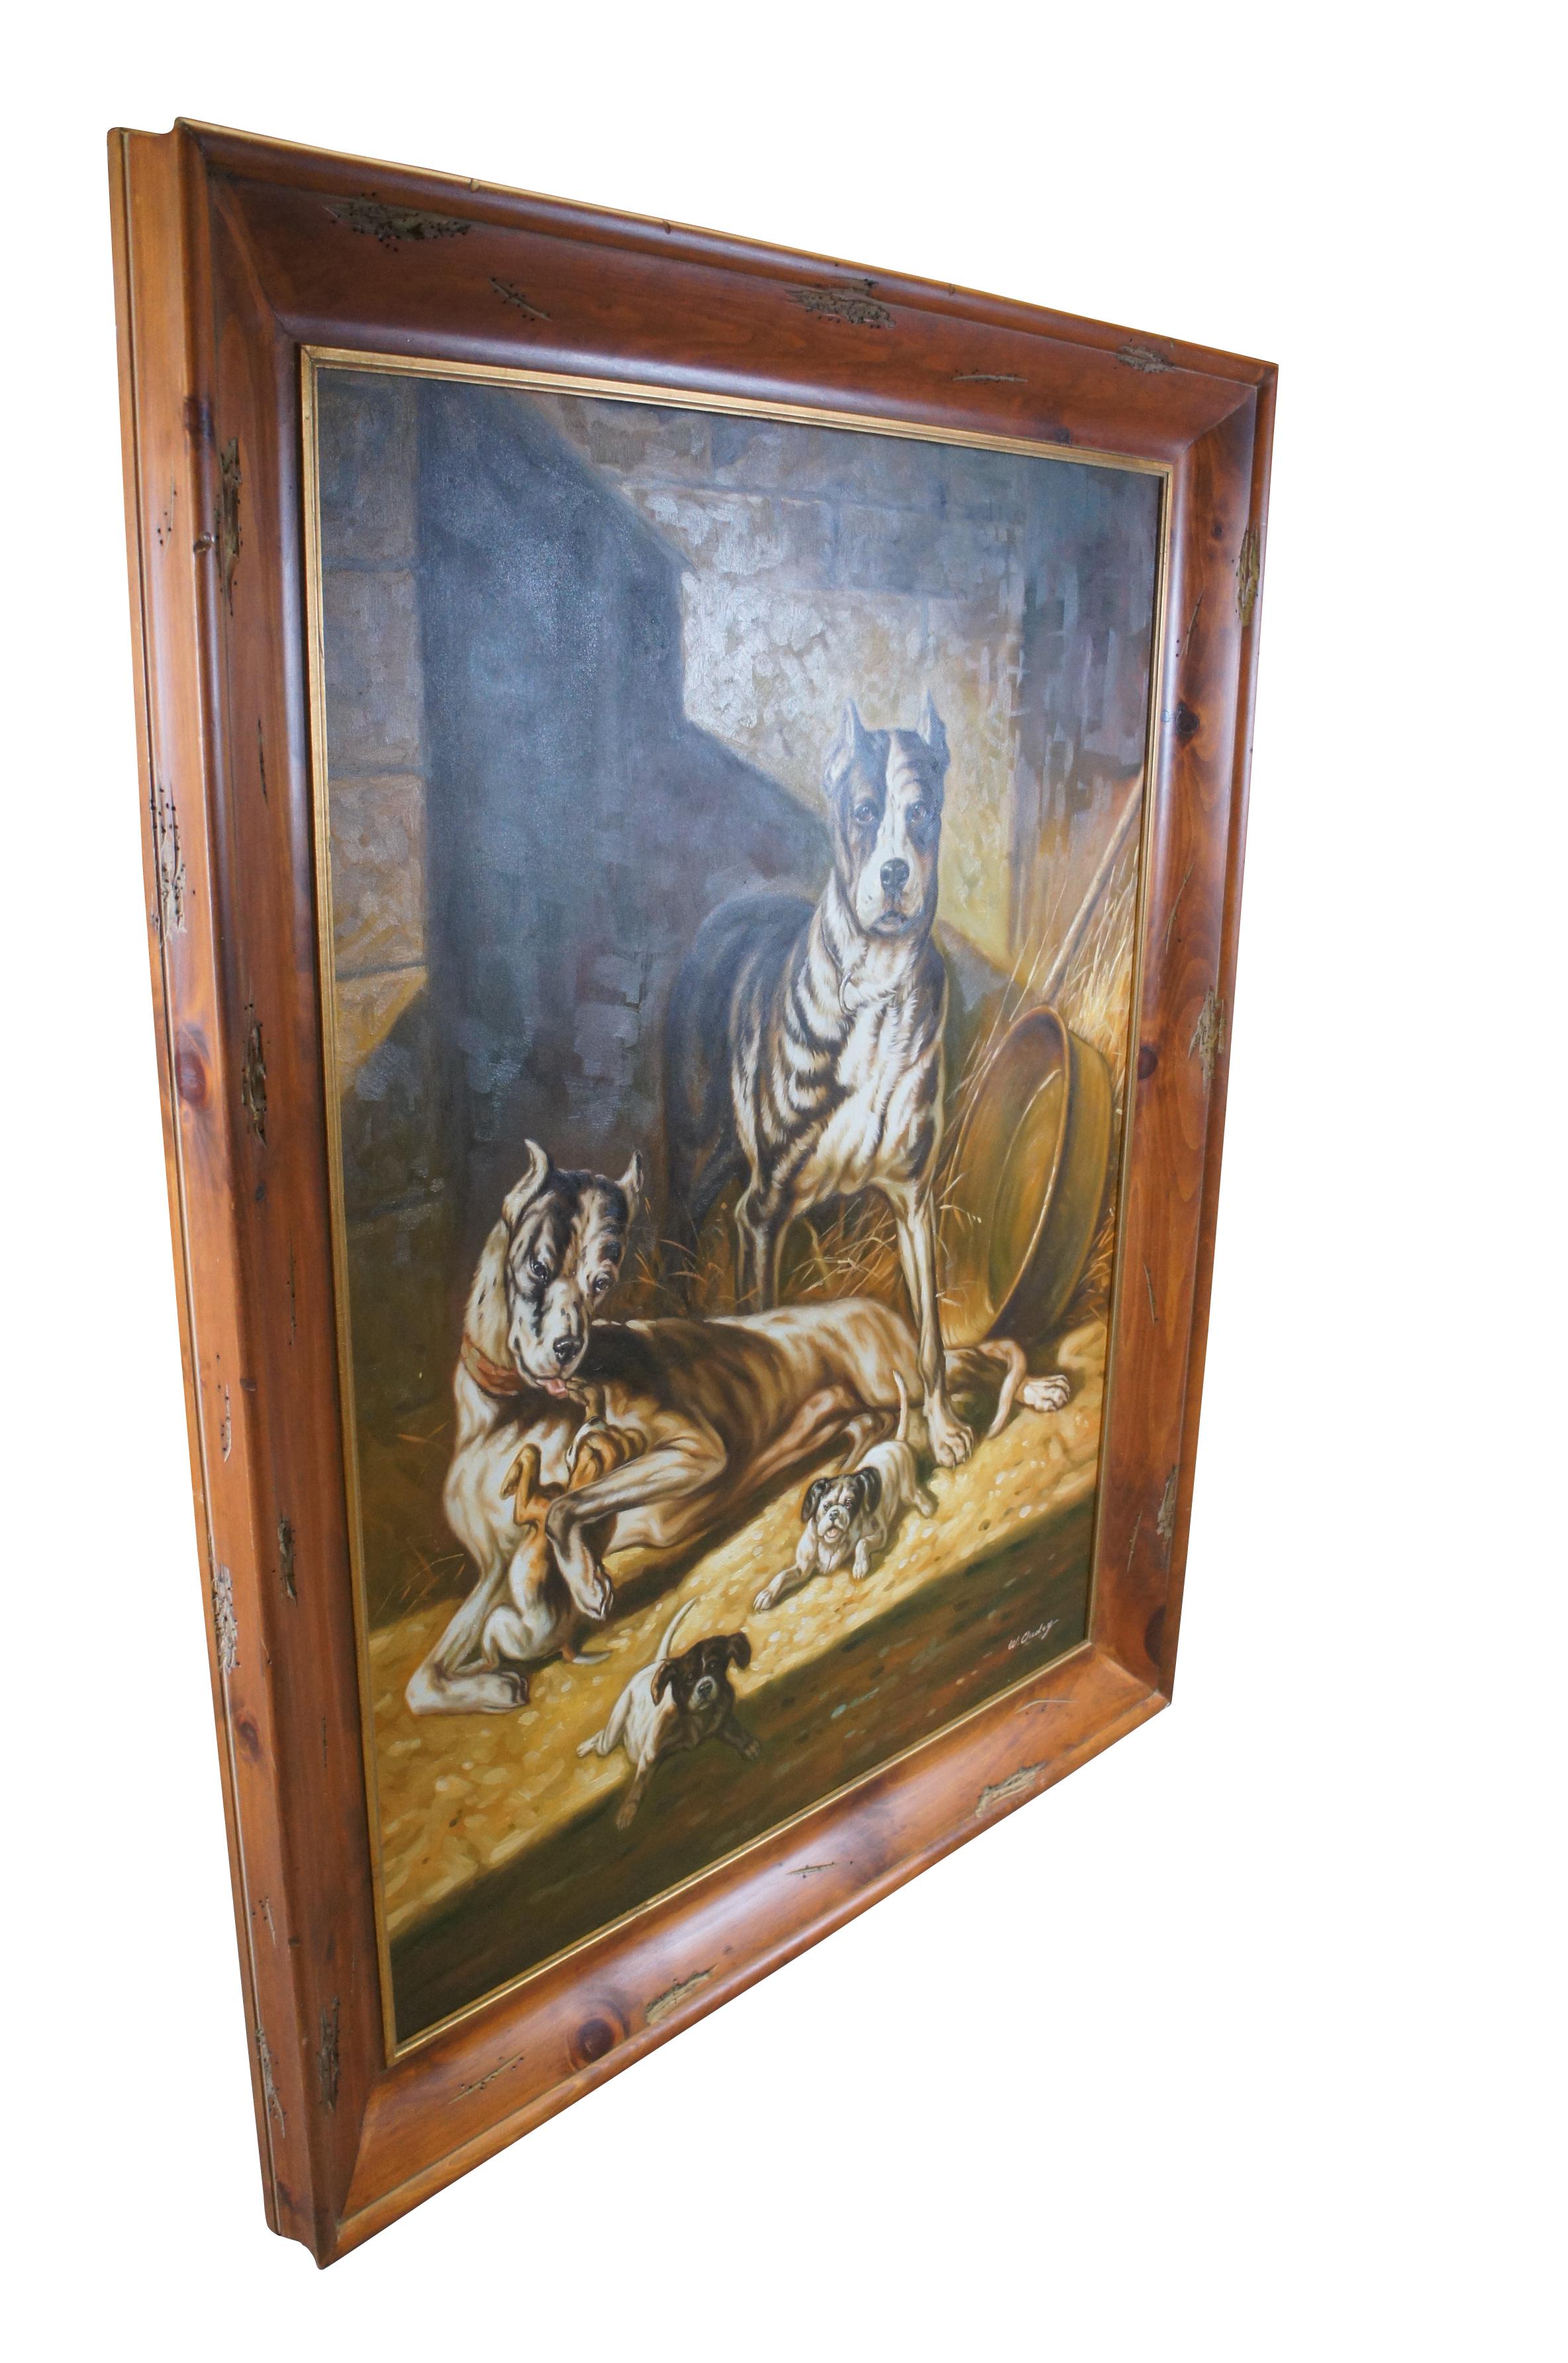 Large vintage W Oudry oil painting on canvas featuring an anthropomorphic Bulldog couple with their young puppies.  This piece was privately commissioned circa late 20th century.  Framed in cherry pine frame with gold accents.  W. Oudry (20th